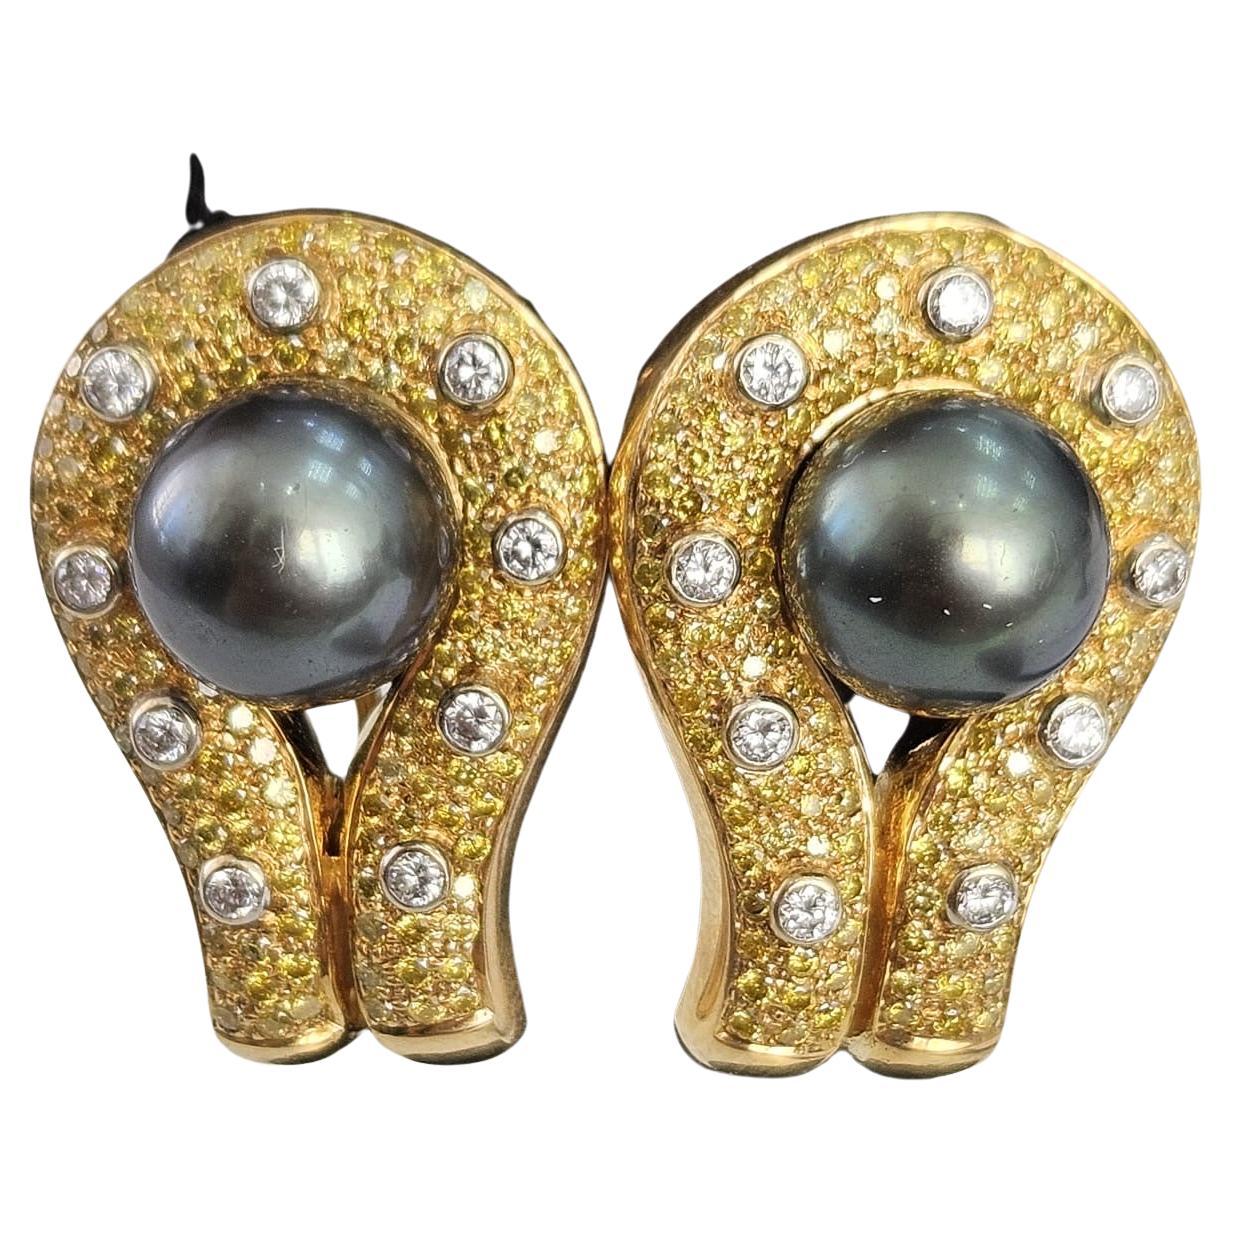 14.87 cts Canary Diamond with Pearls and White Diamond Earrings For Sale